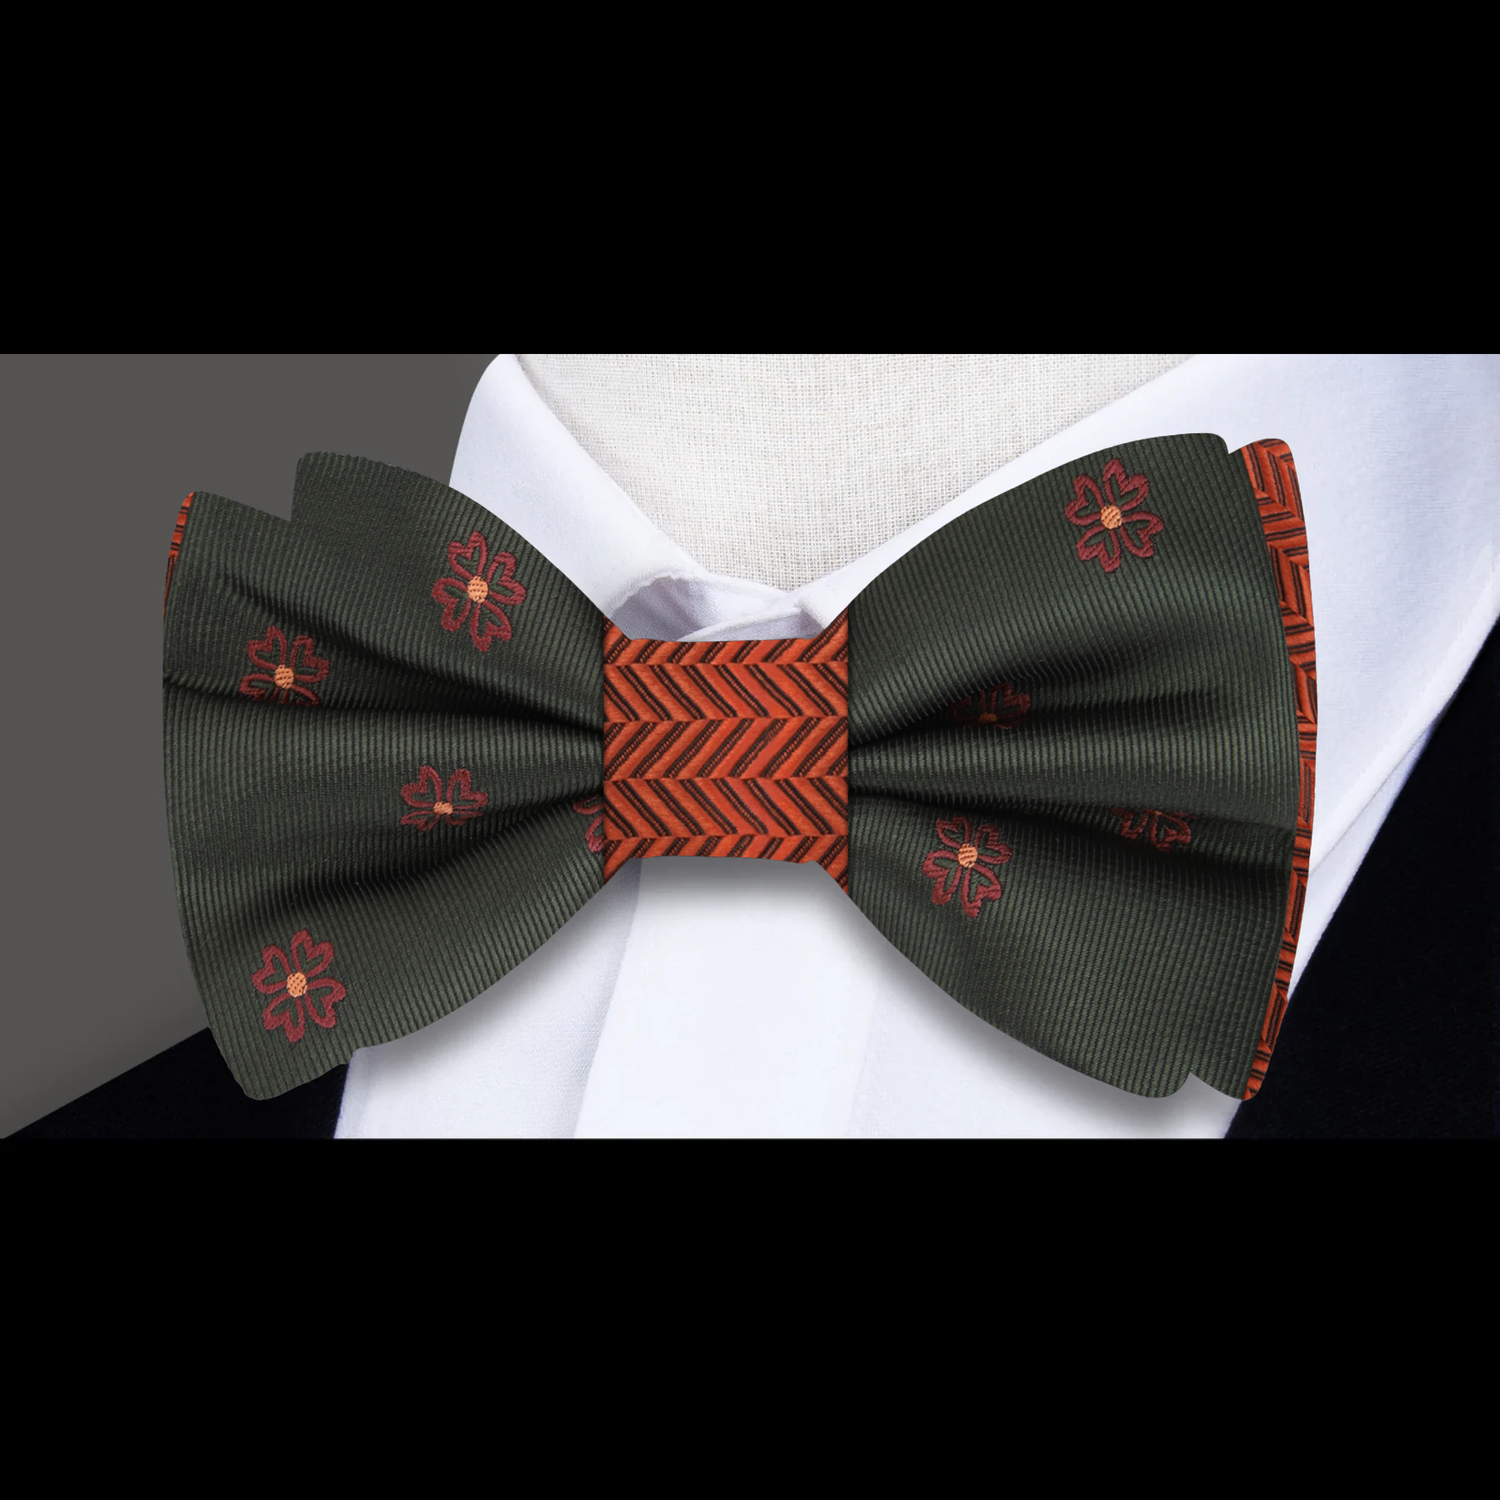 Charcoal, Red, Orange Clovers and Crosshatch Bow tie  